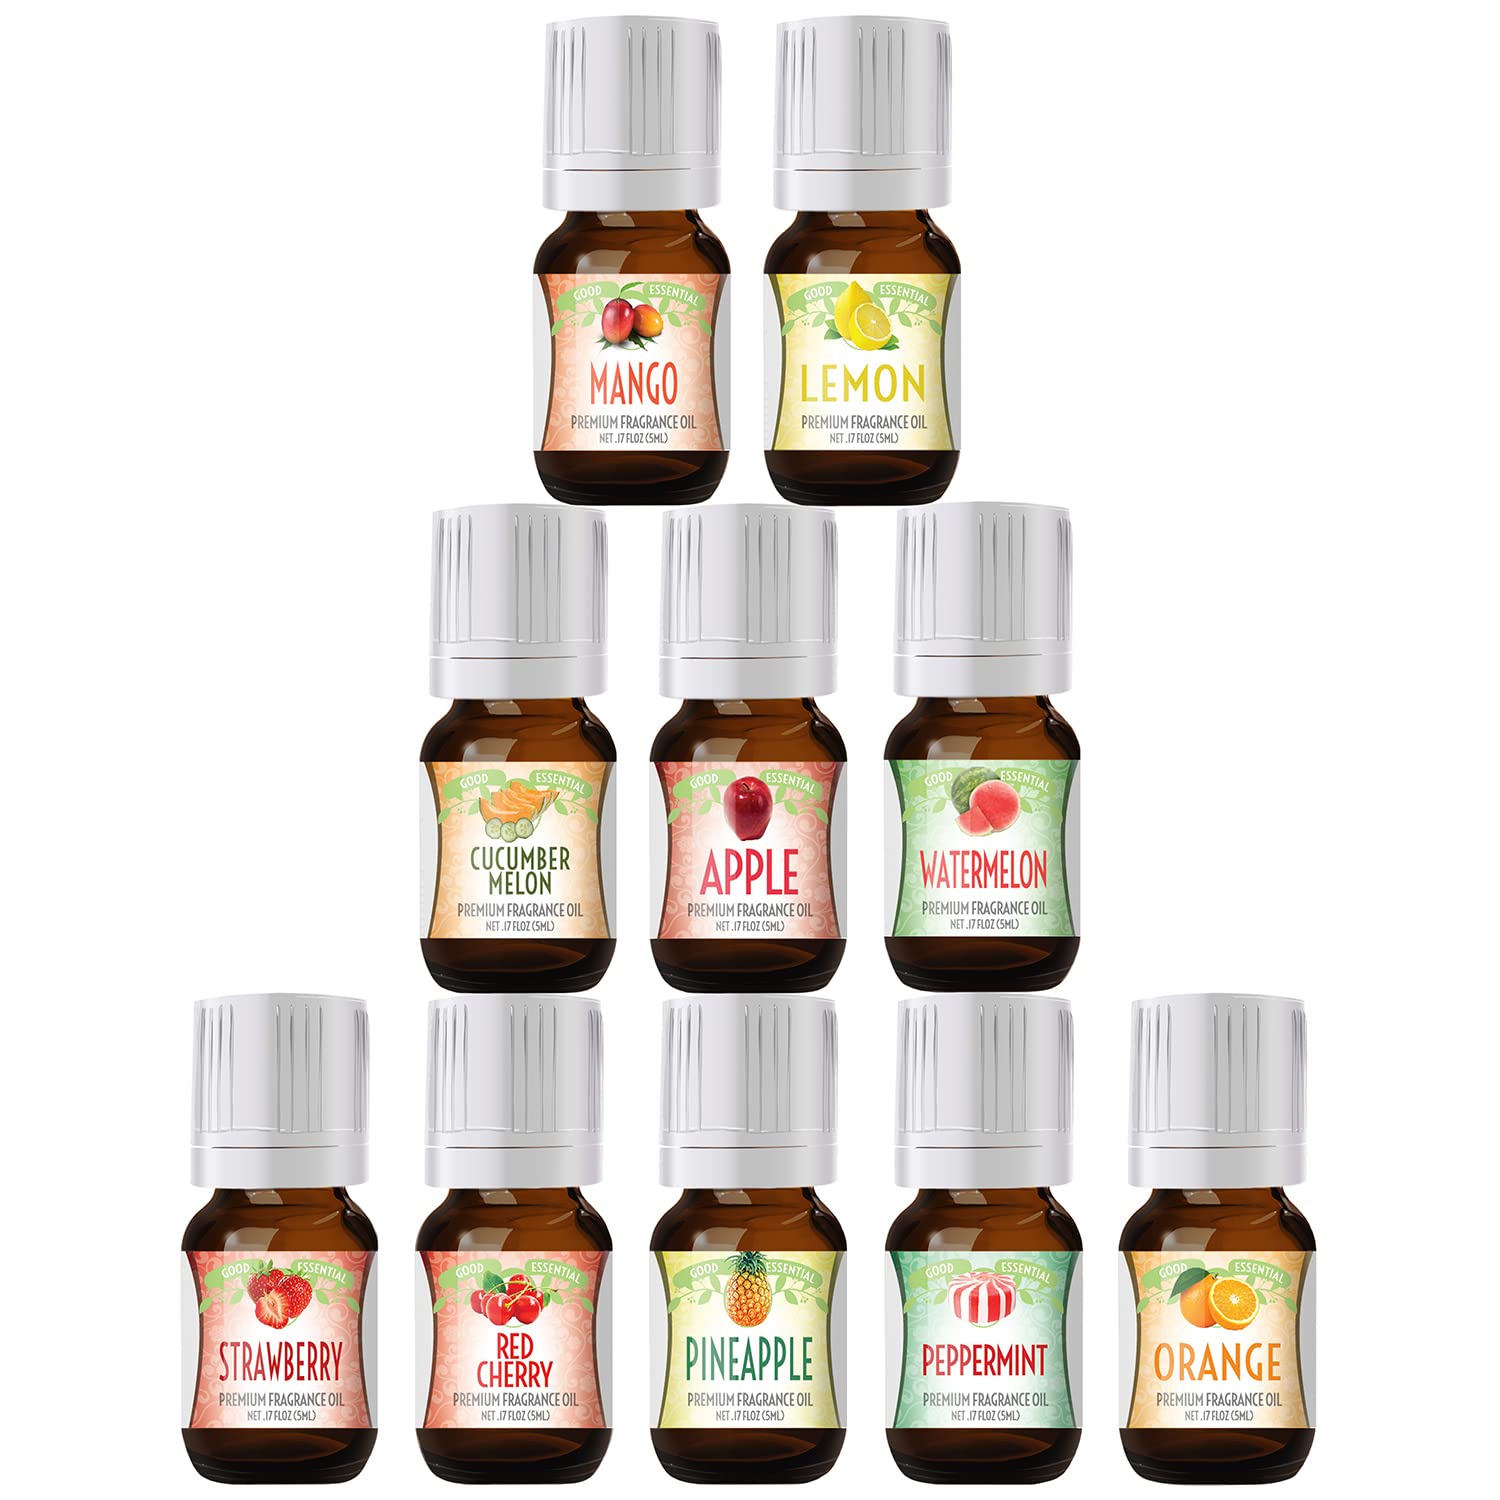 Fruity Fruits Good Essential Fragrance Oil Set (Pack of 10) 5ml Set Includes Strawberry, Apple, Watermelon, Pineapple, Cucumber Melon, Red Cherry, Mango, Peppermint, Lemon, and Orange